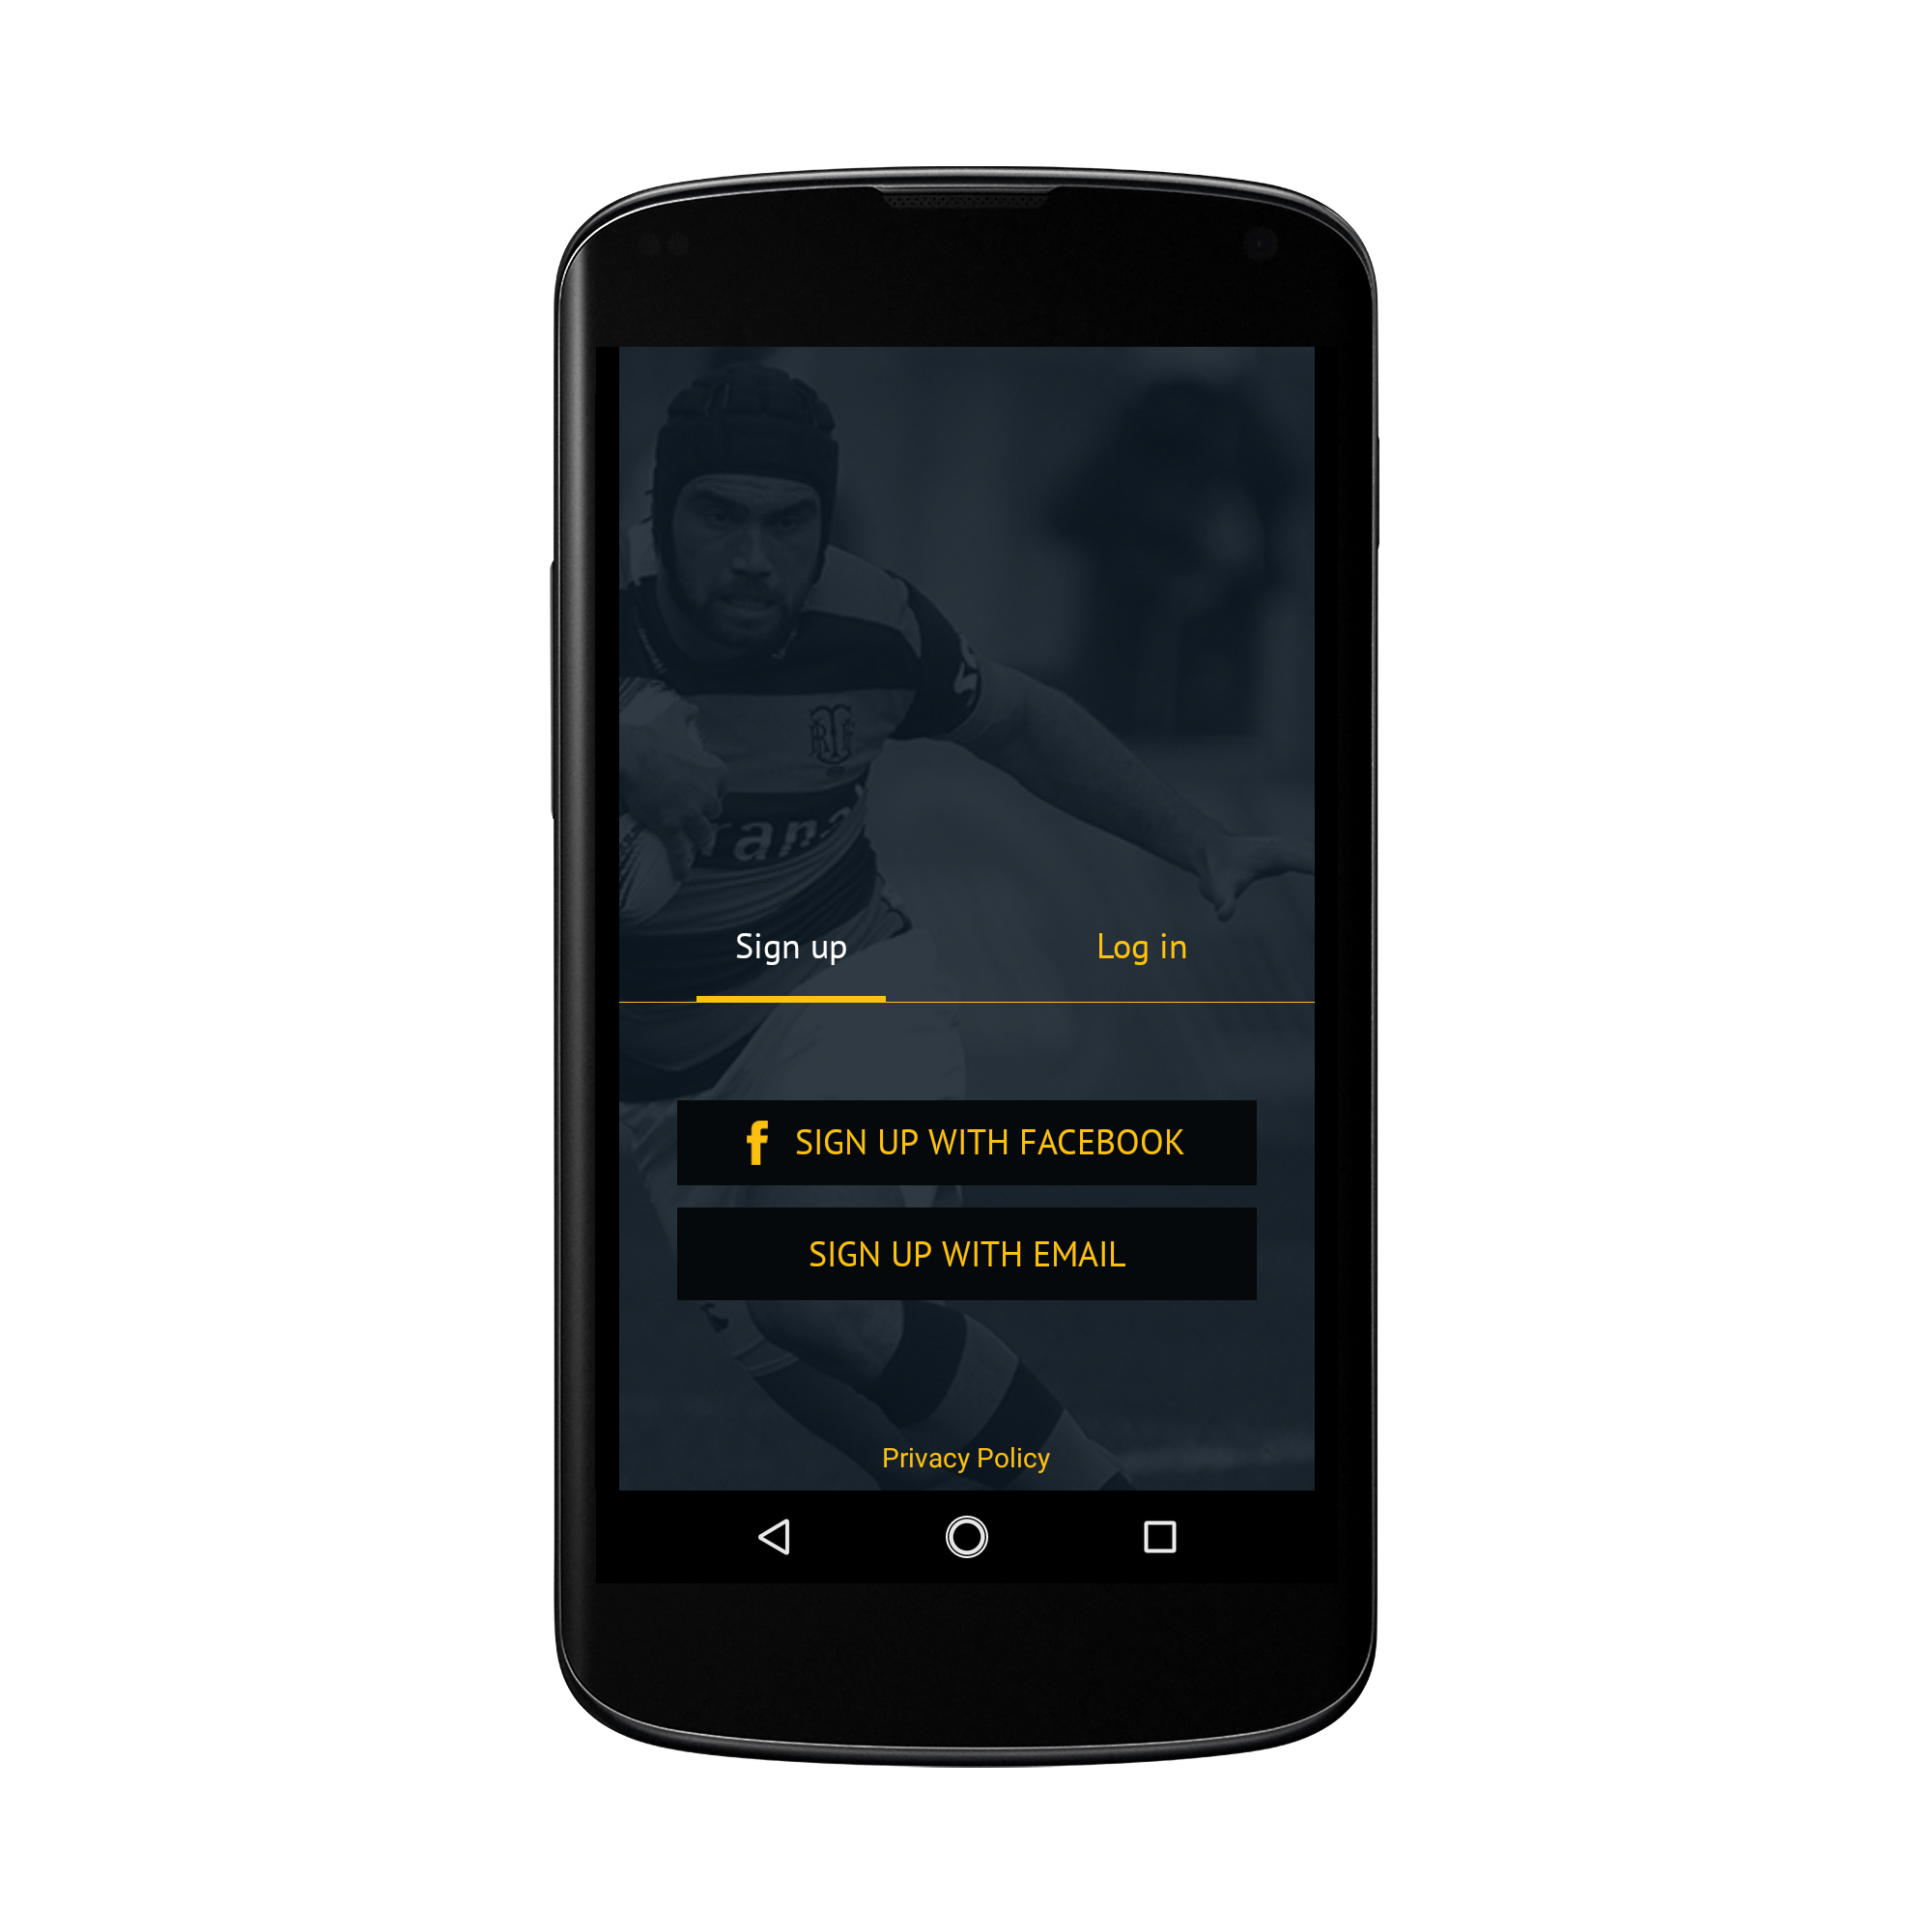 Cross Platform App (Xamarin Forms) TRFU app makes following favorite local Taranaki Rugby Teams simple and easy. Get the latest news, results or upcoming matches at your finger tips. TRFU app uses Auth0 and Facebook for seamless identity authentication and push notifications that always keeps users updated.